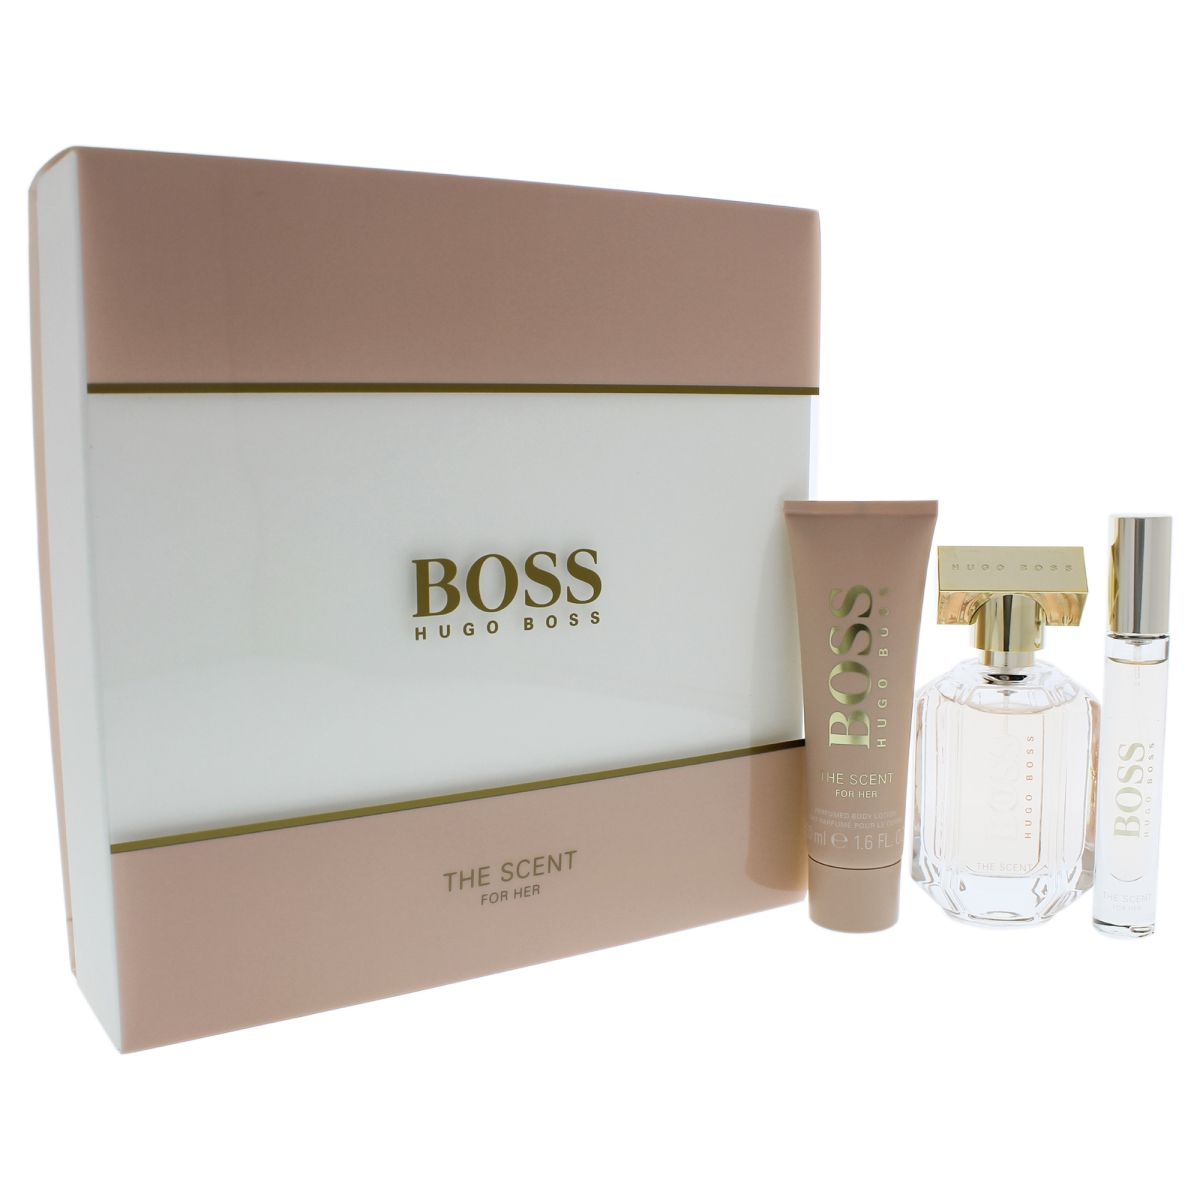 I0085189 Boss The Scent 3 Piece Gift Set For Women